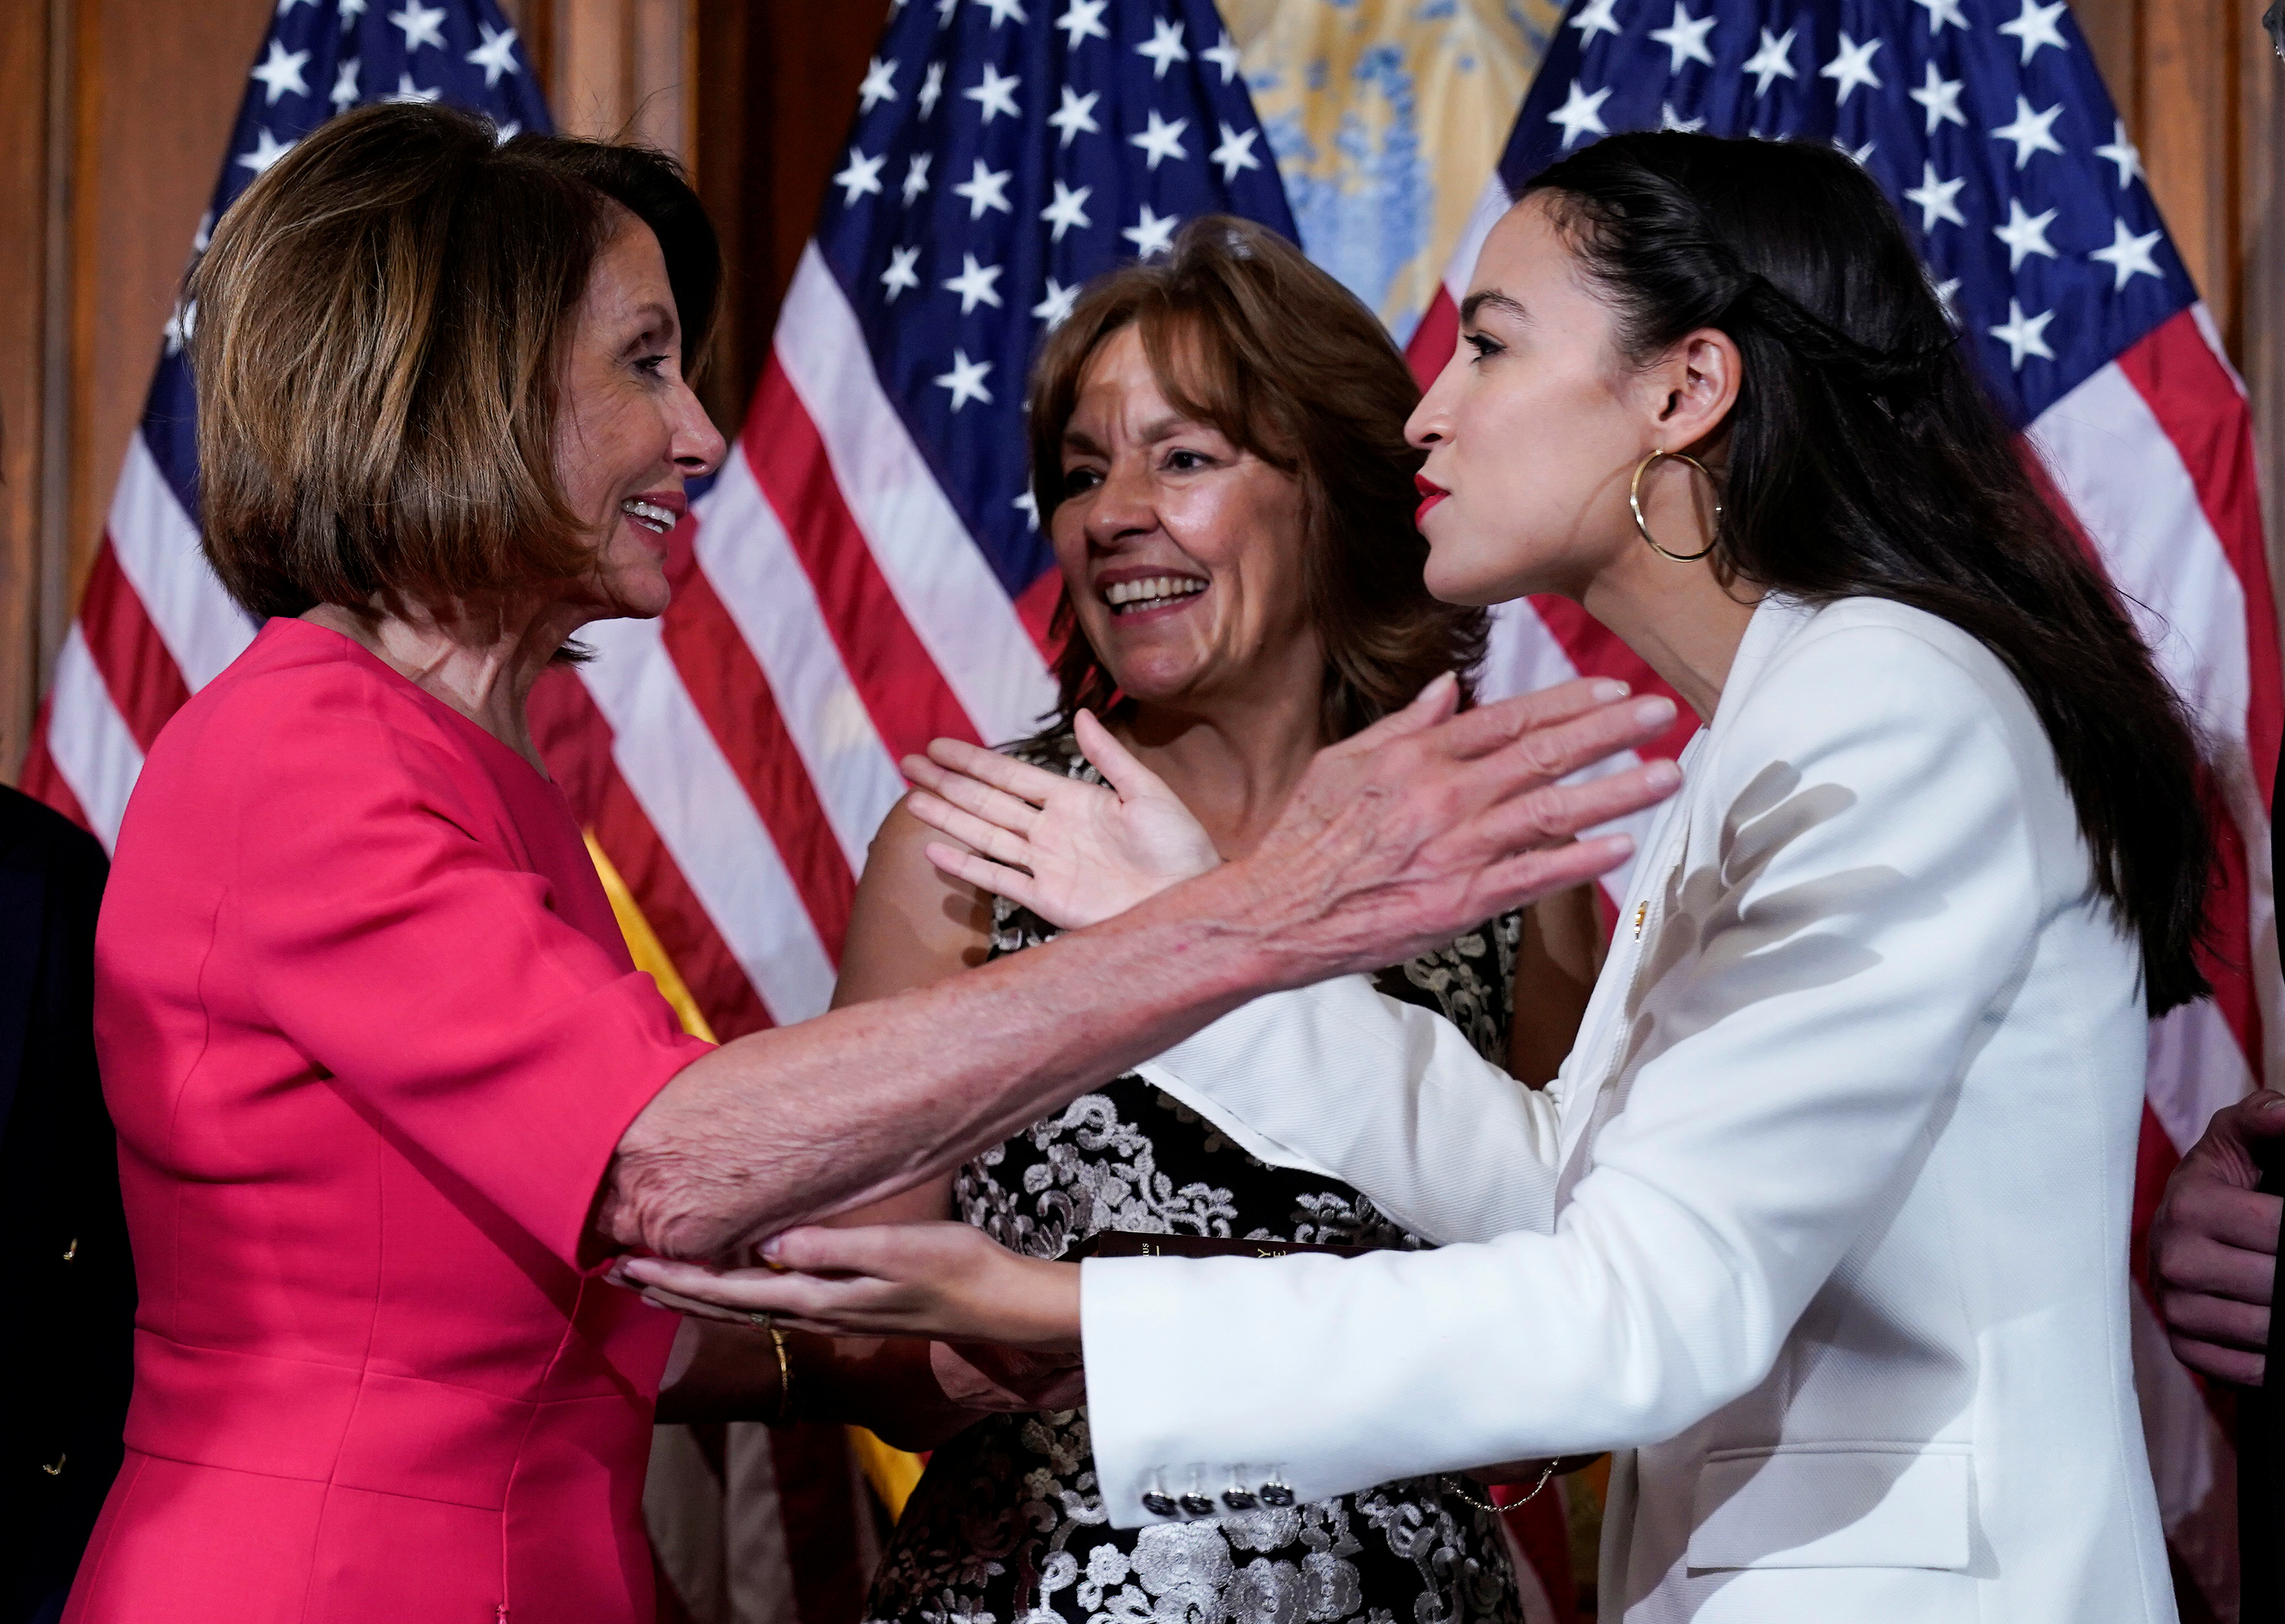 Rep. Alexandria Ocasio-Cortez (D-NY) greets Speaker of the House Nancy Pelosi (D-CA) before a ceremonial swearing-in picture on Capitol Hill in Washington, U.S., January 3, 2019. REUTERS/Joshua Roberts